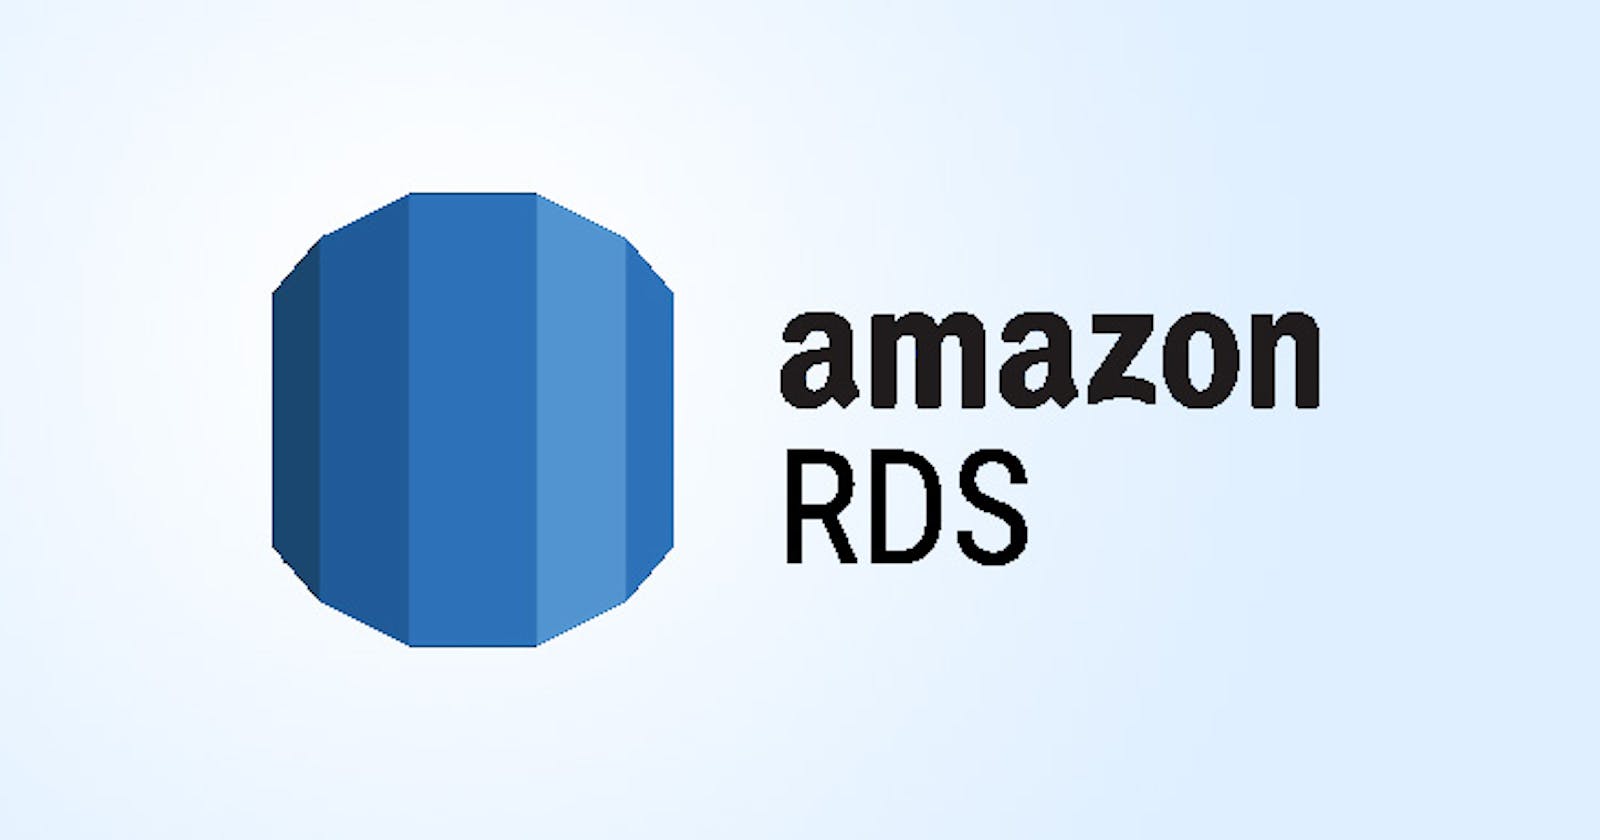 Relational Database Service (RDS) in AWS: An Overview